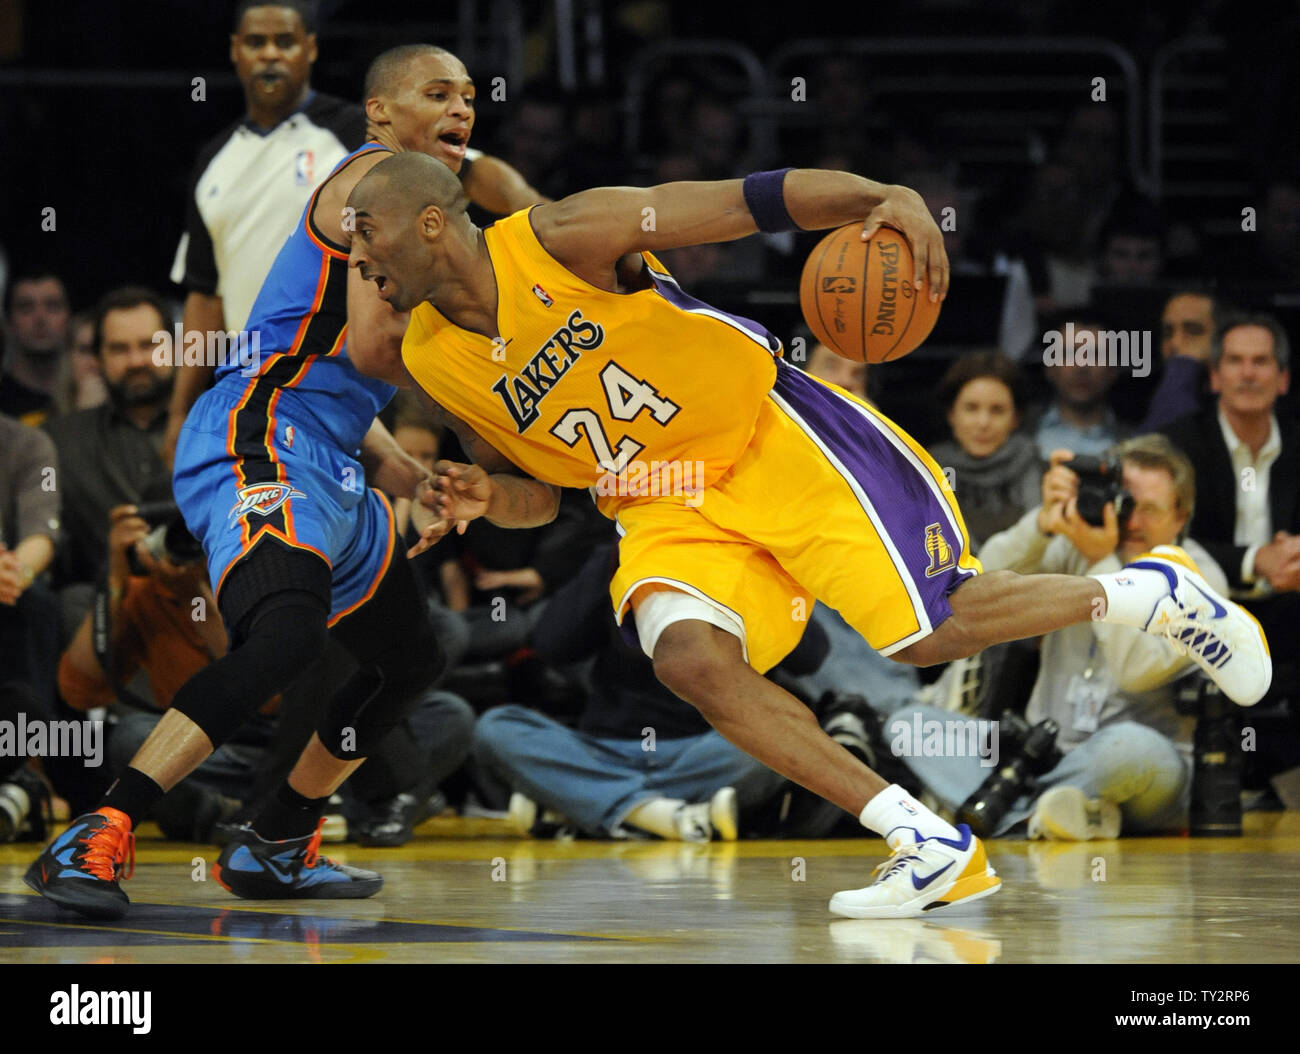 Kobe Bryant Gets Competition from Jodie Meeks in Tuesday Night